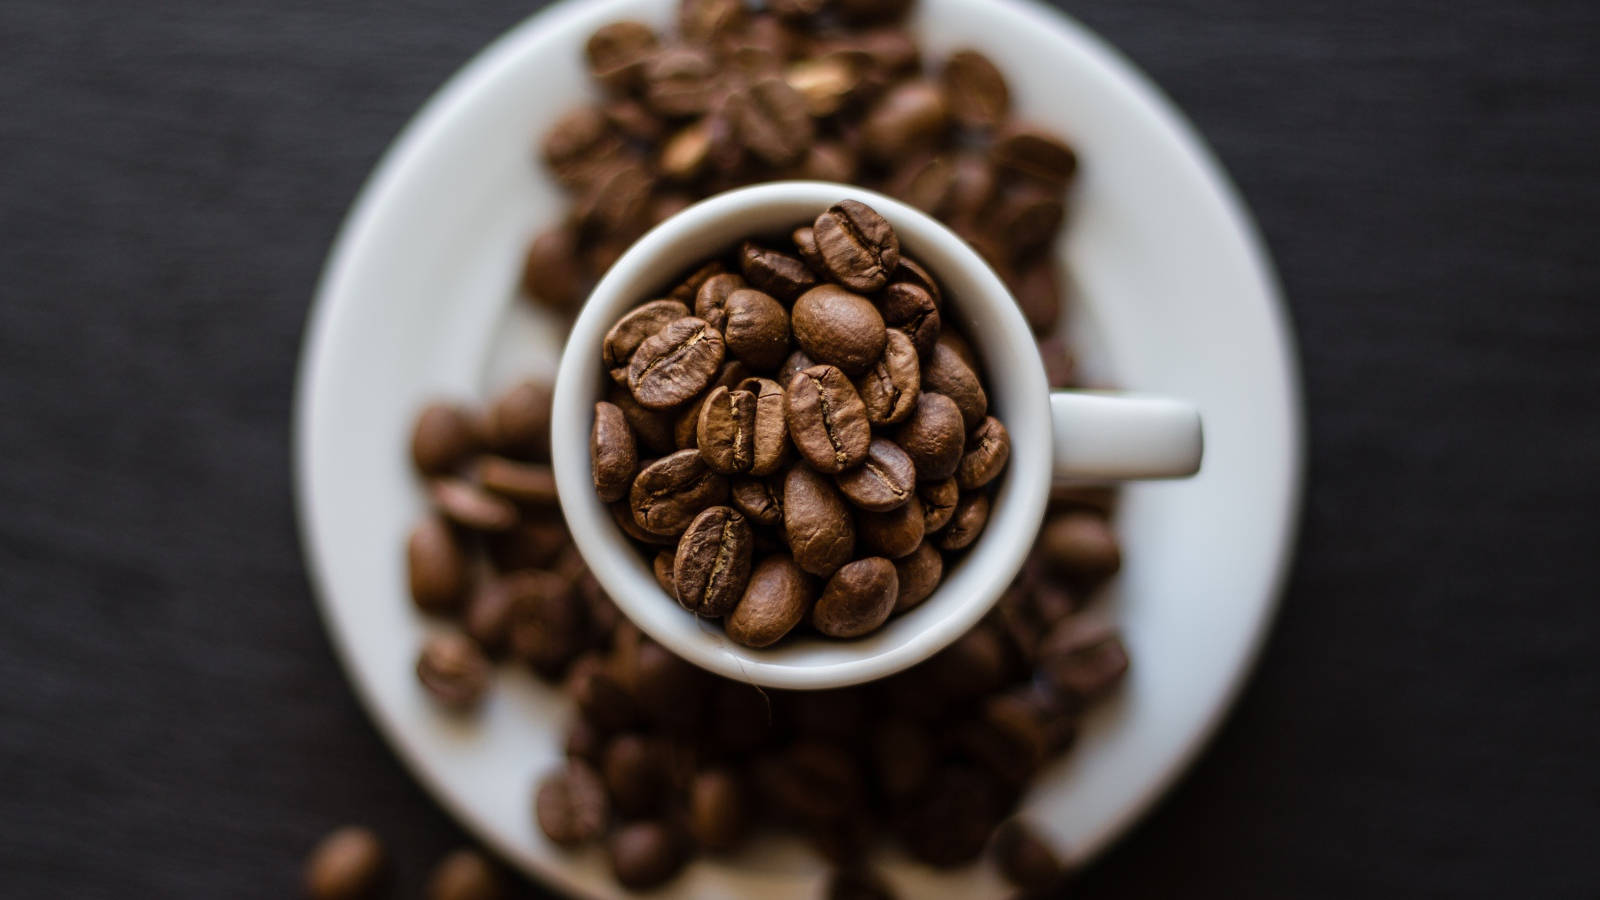 Top View Of Coffee Cup With Coffee Beans Wallpaper